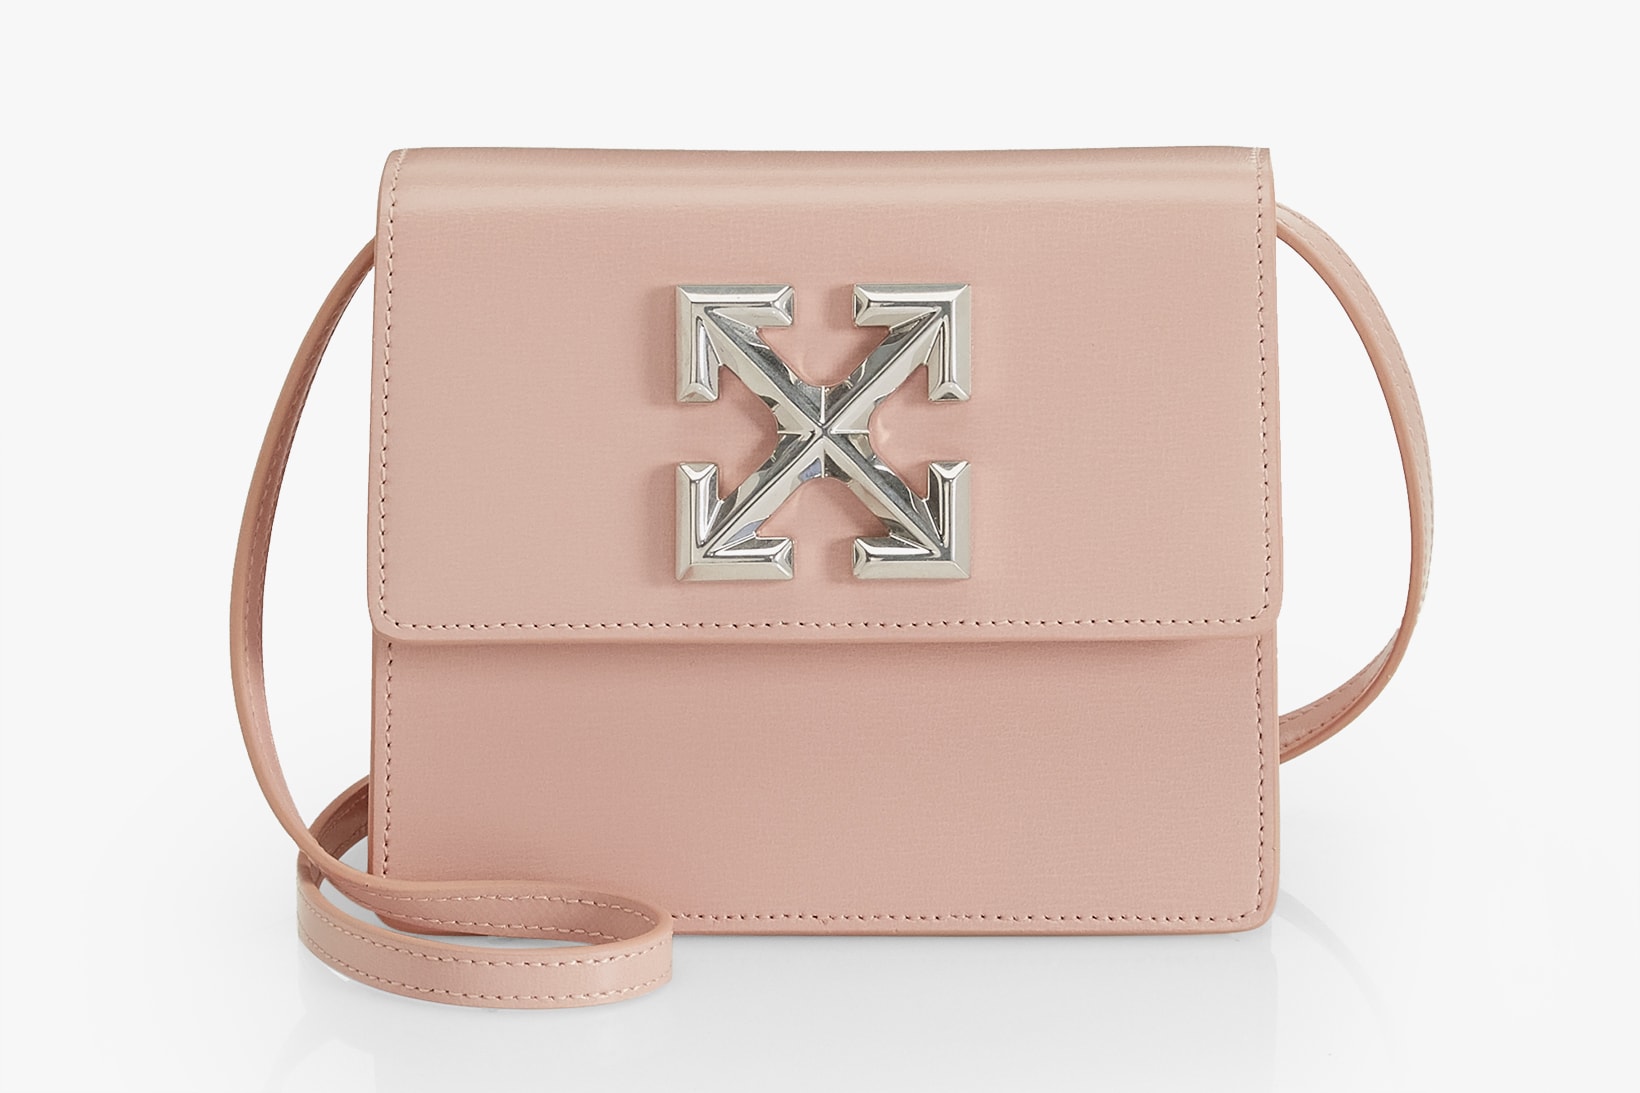 Off-White Jitney Pastel Pink Leather Bag Virgil Abloh Saks Fifth Avenue Fine Arts Collection